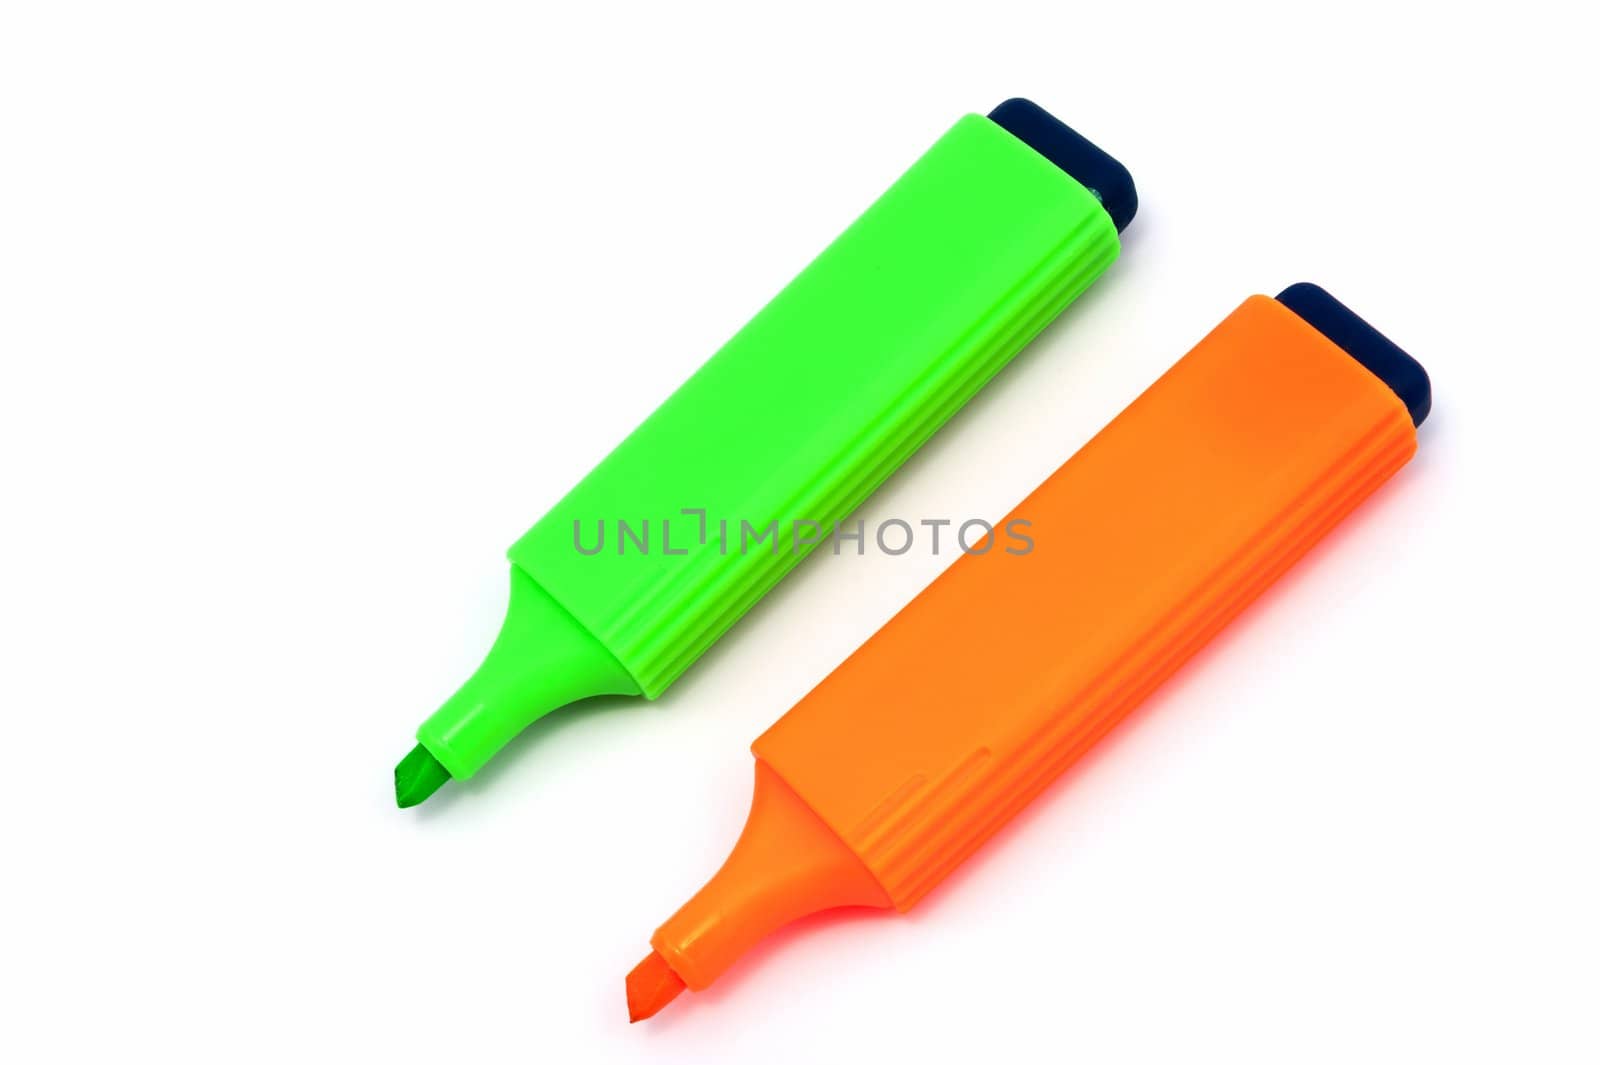 Two highlighters by raywoo